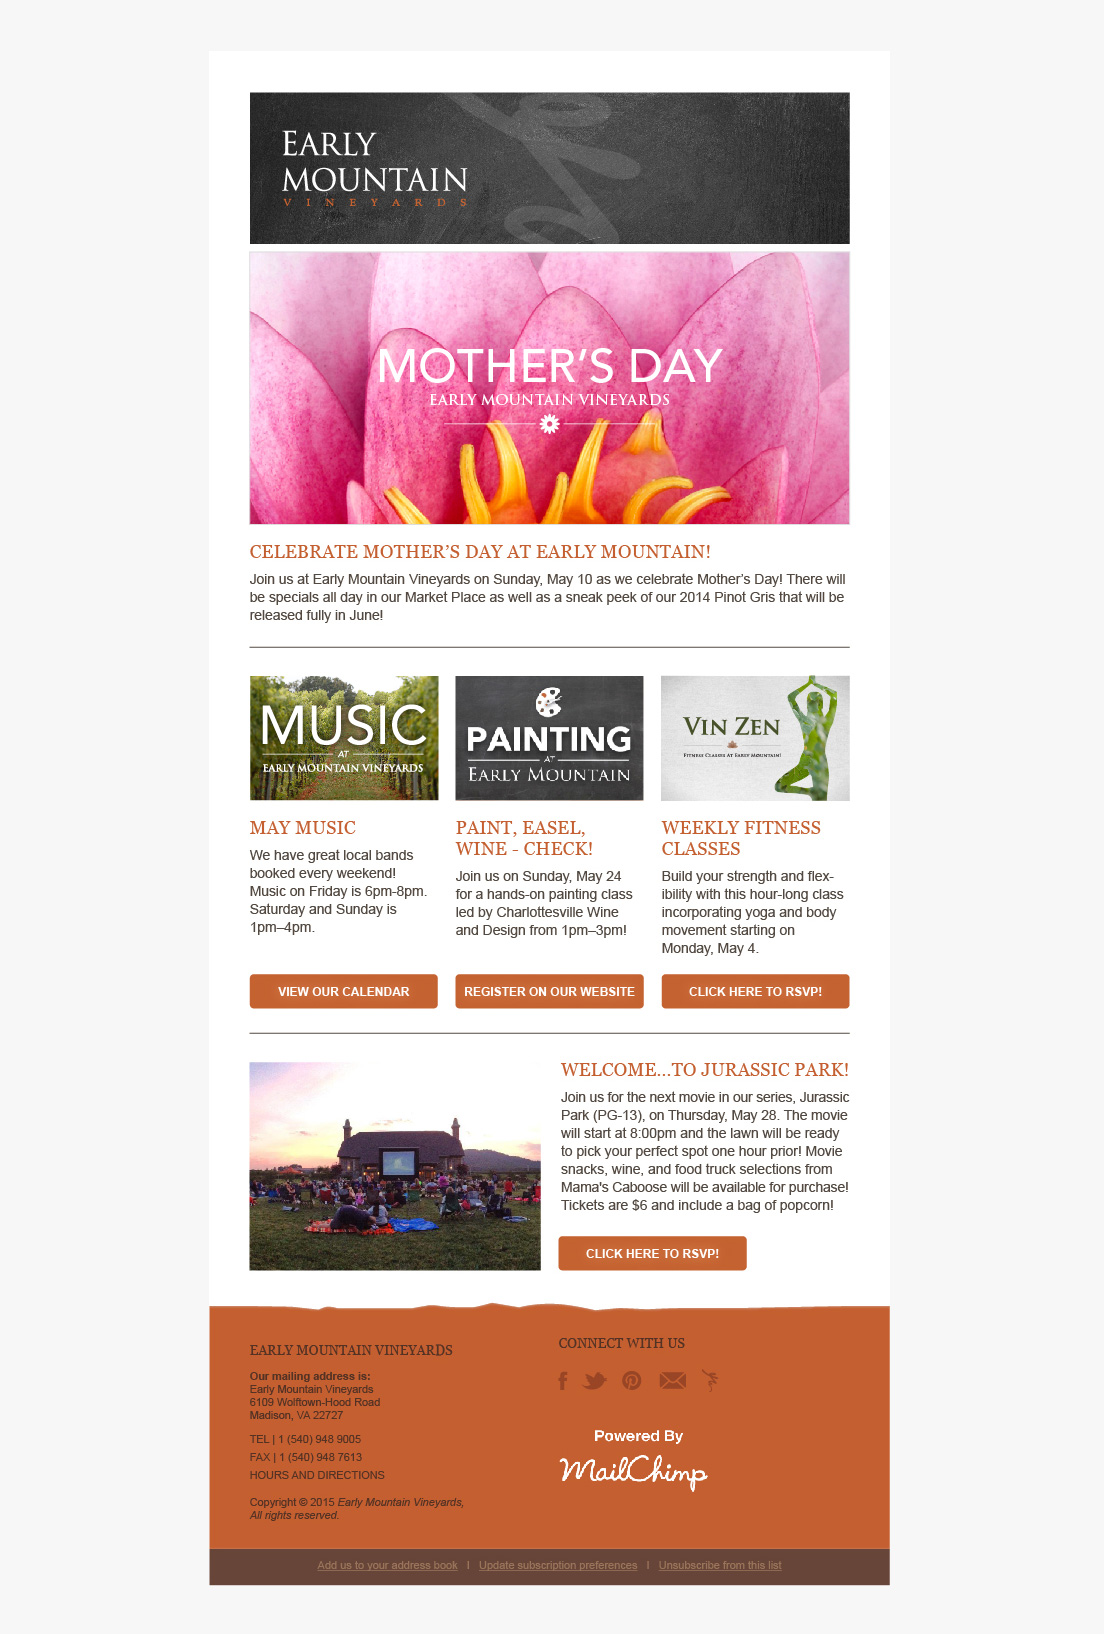 Email Newsletter Design for Early Mountain Vineyards